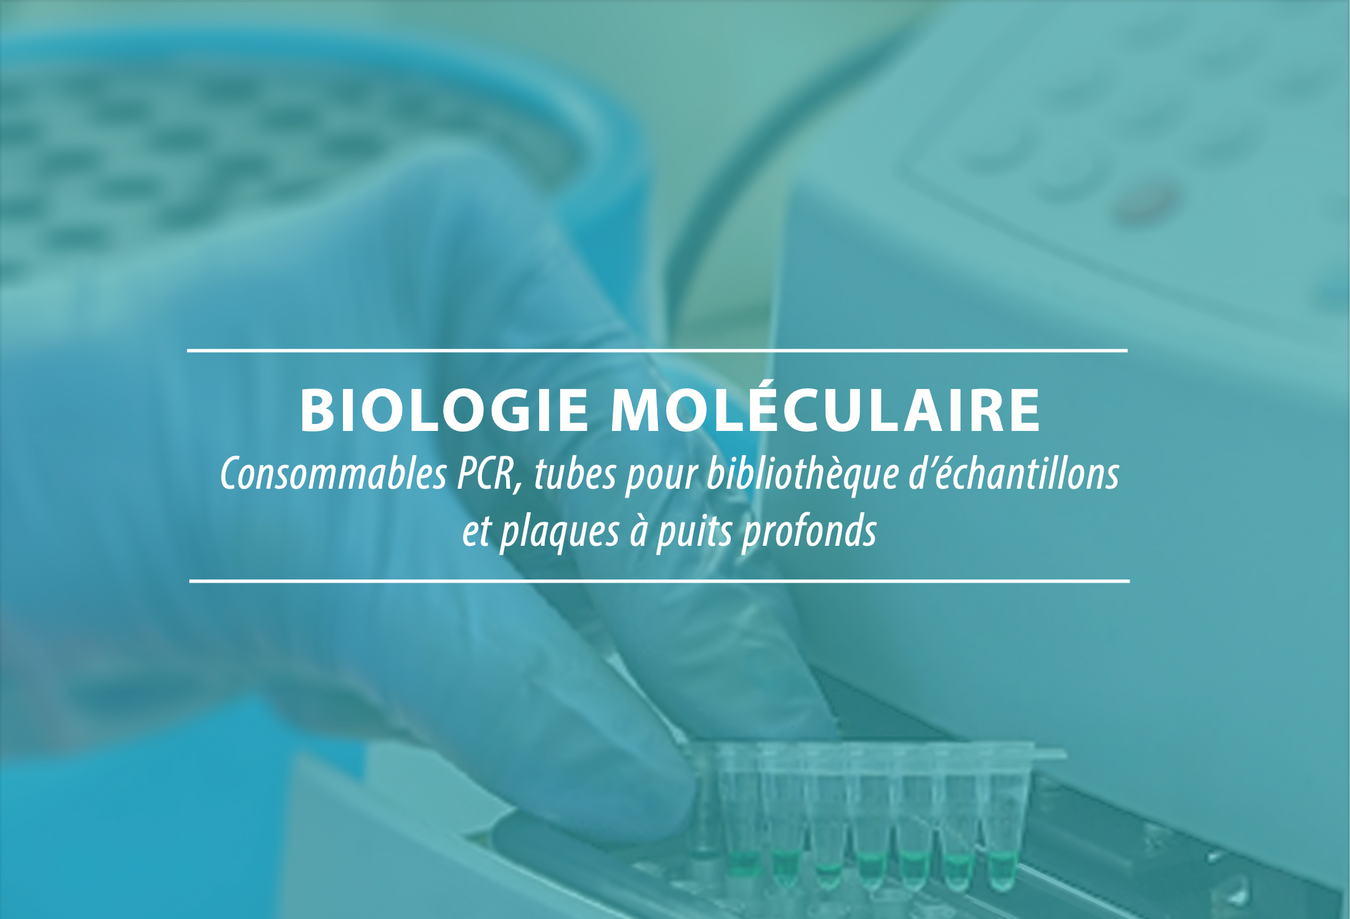 Molecular Biology PCR products information including consumables, pcr tubes and deep well plates